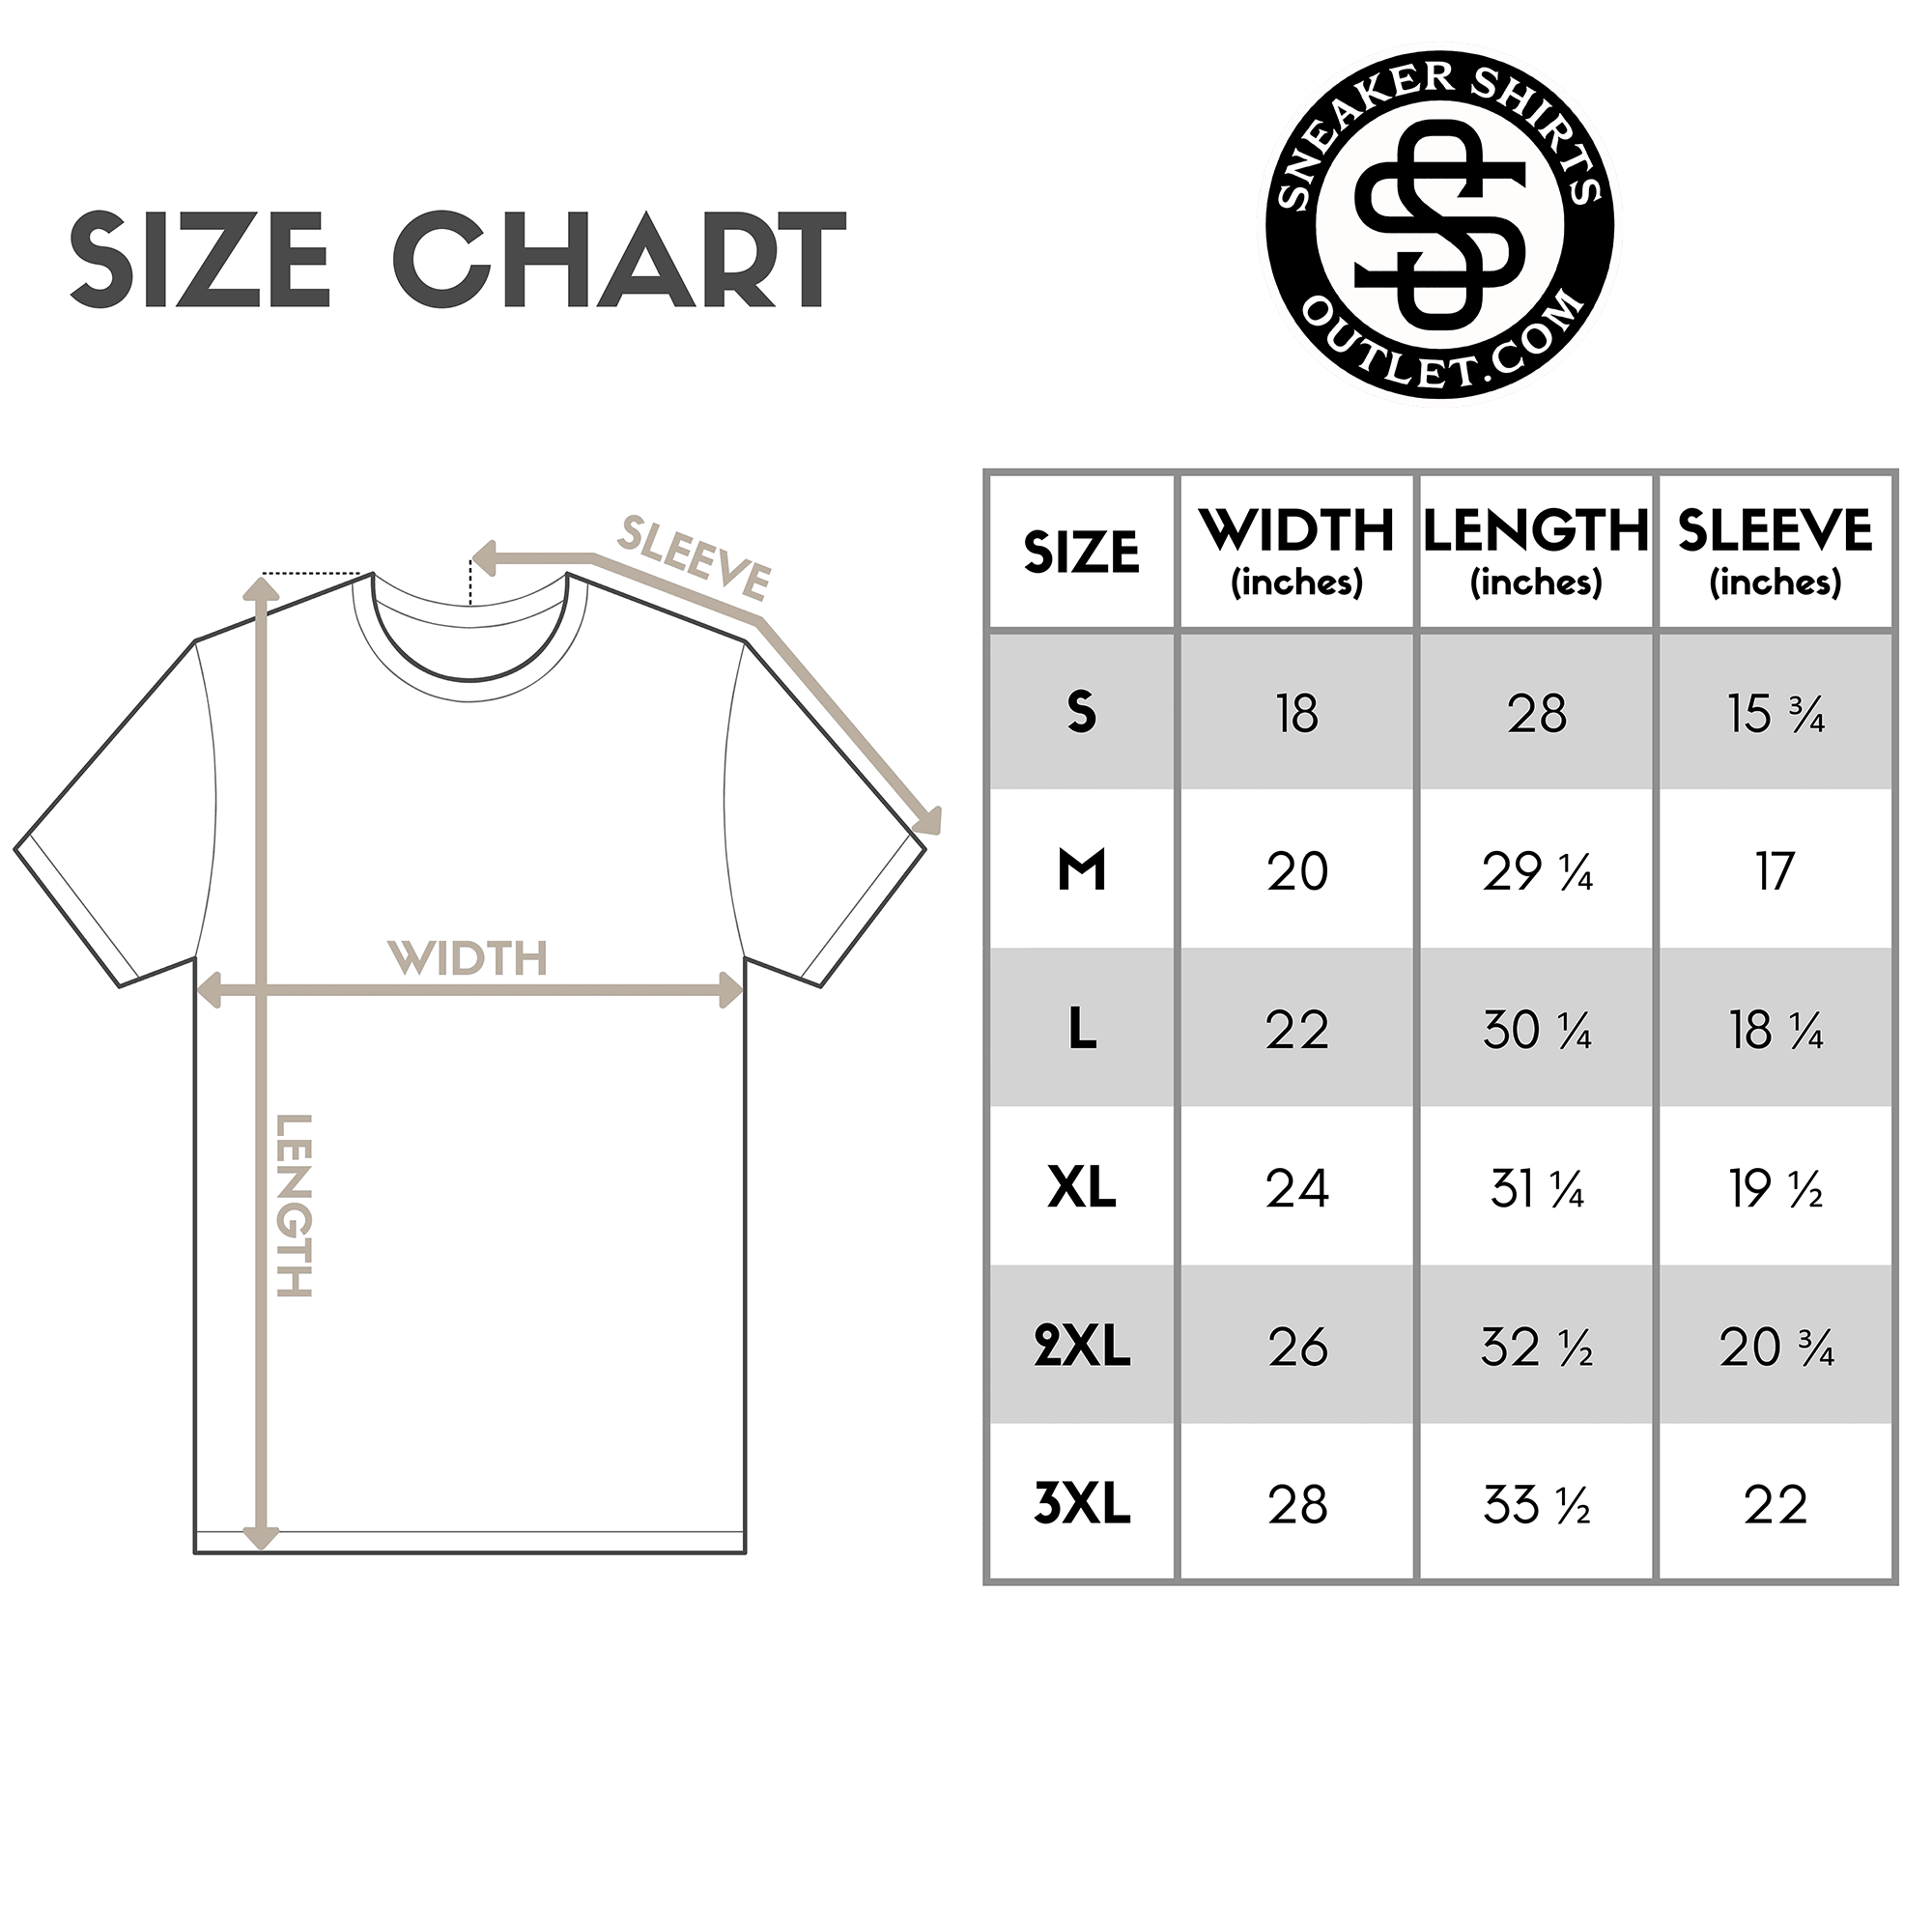 Friday the 13th shirt size chart photo